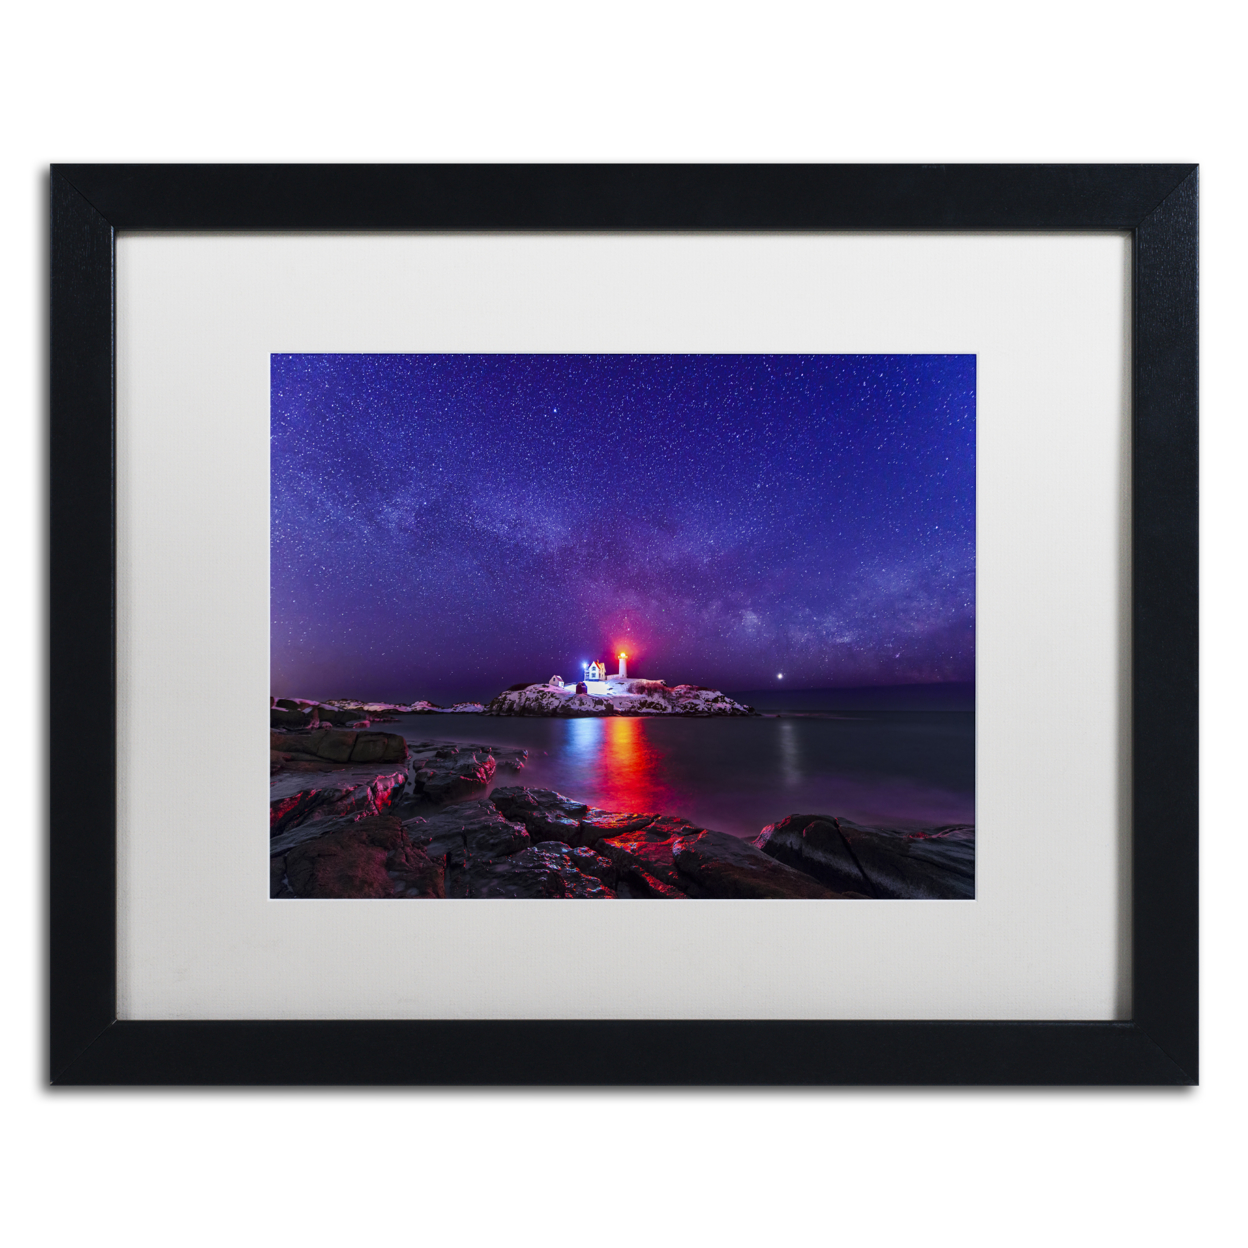 Michael Blanchette Photography 'Milky Way Comeback' Black Wooden Framed Art 18 X 22 Inches